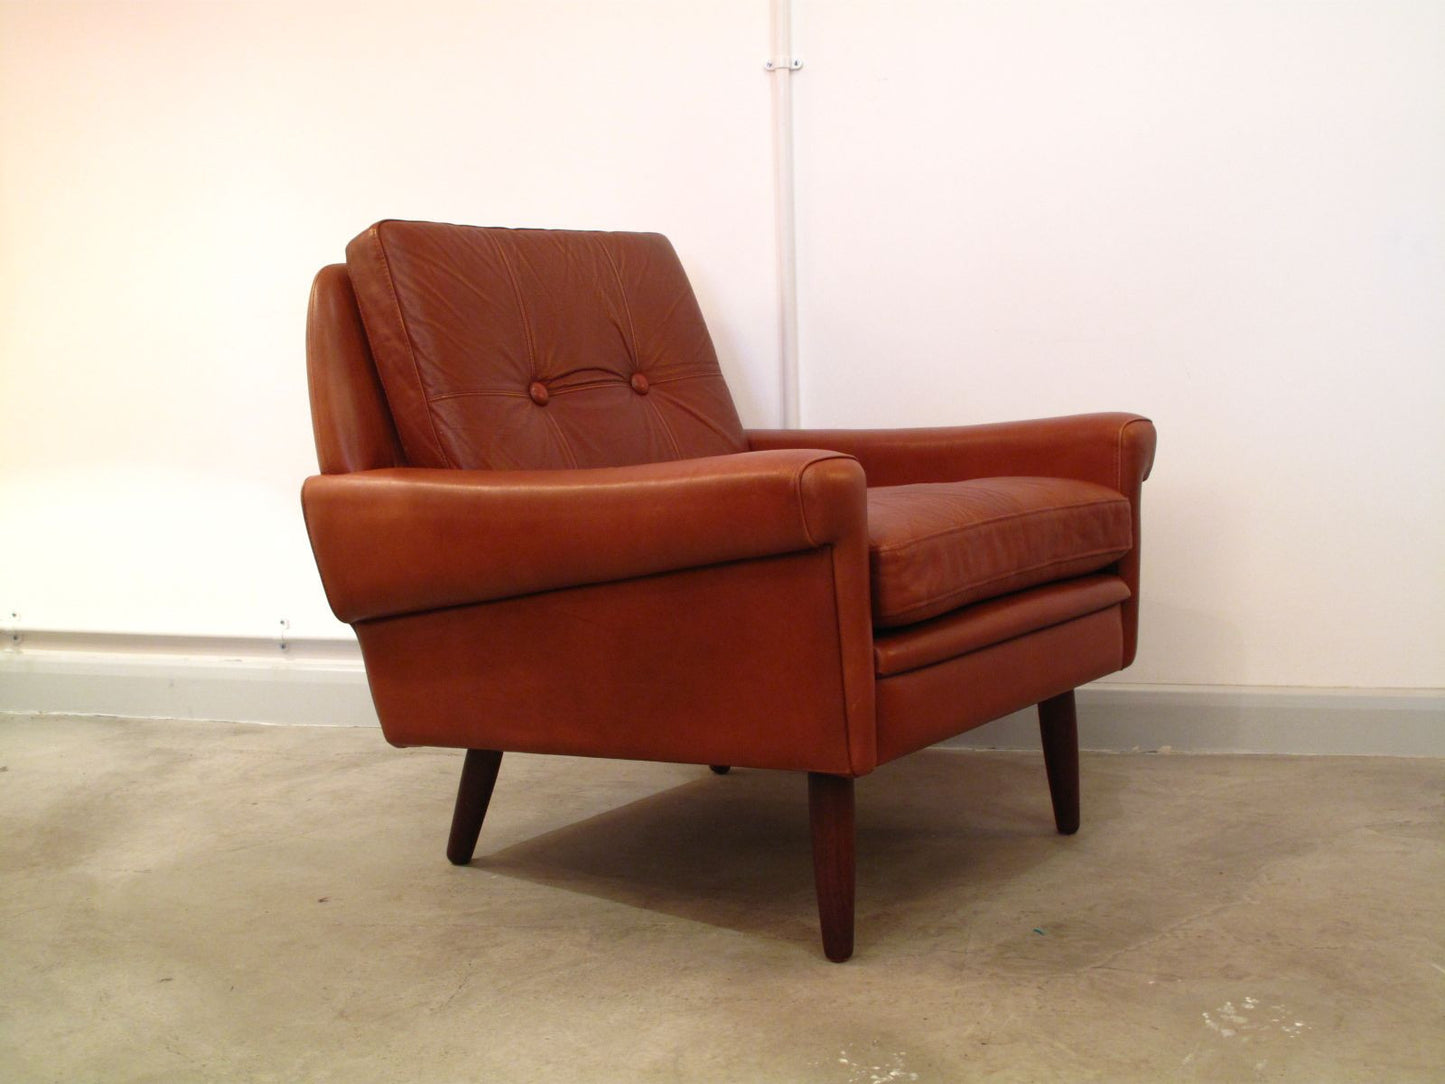 Lowback caramel-colored lounge chair